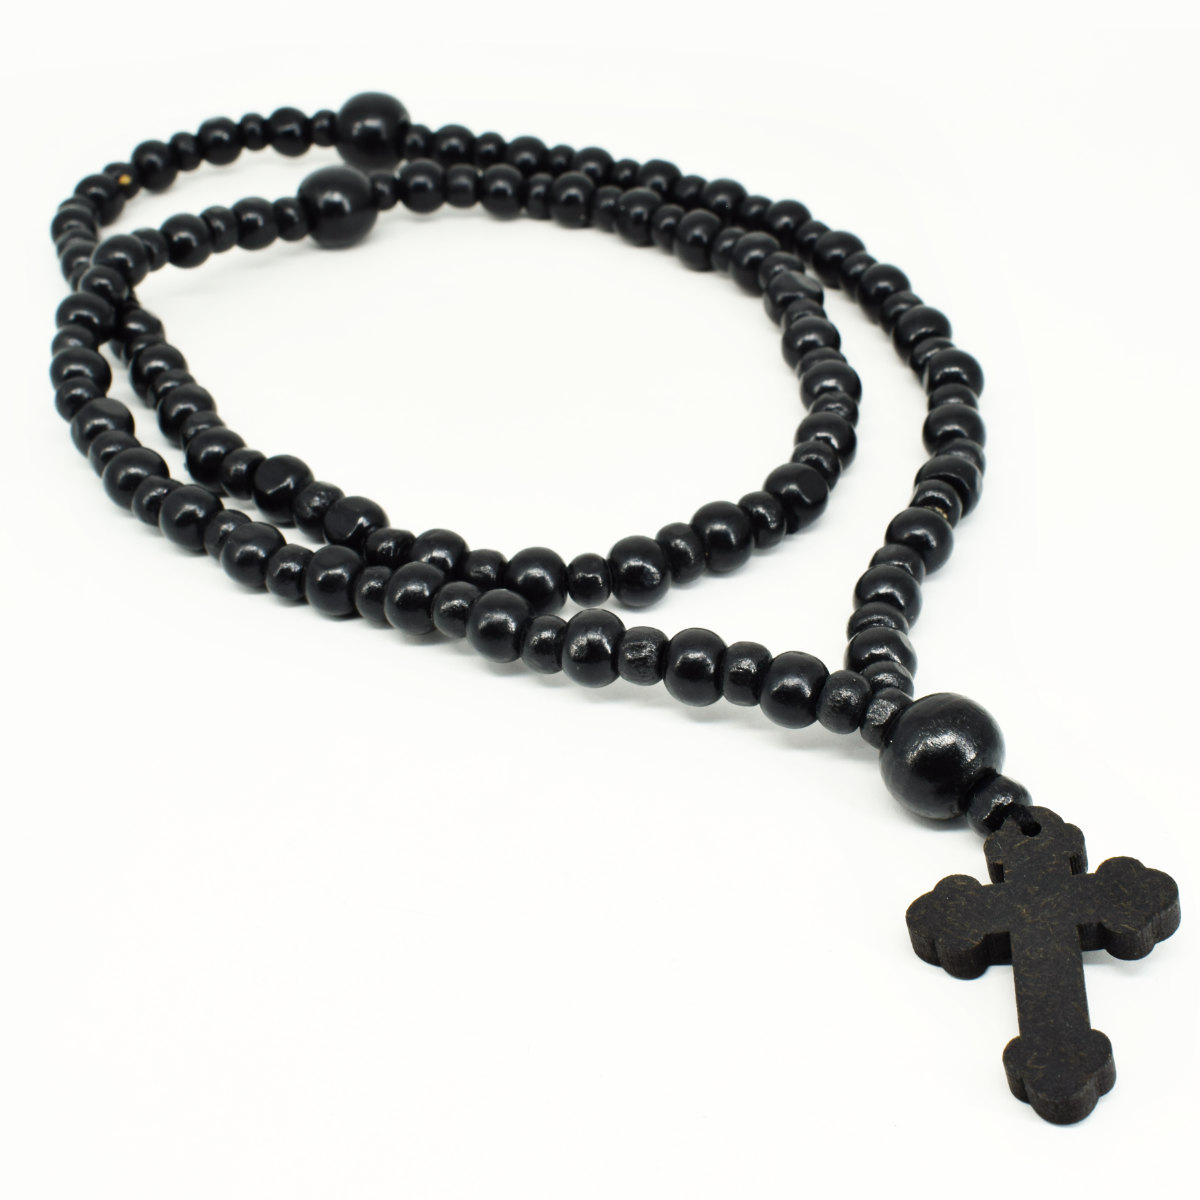 Black Orthodox Rosary with Wooden Cross